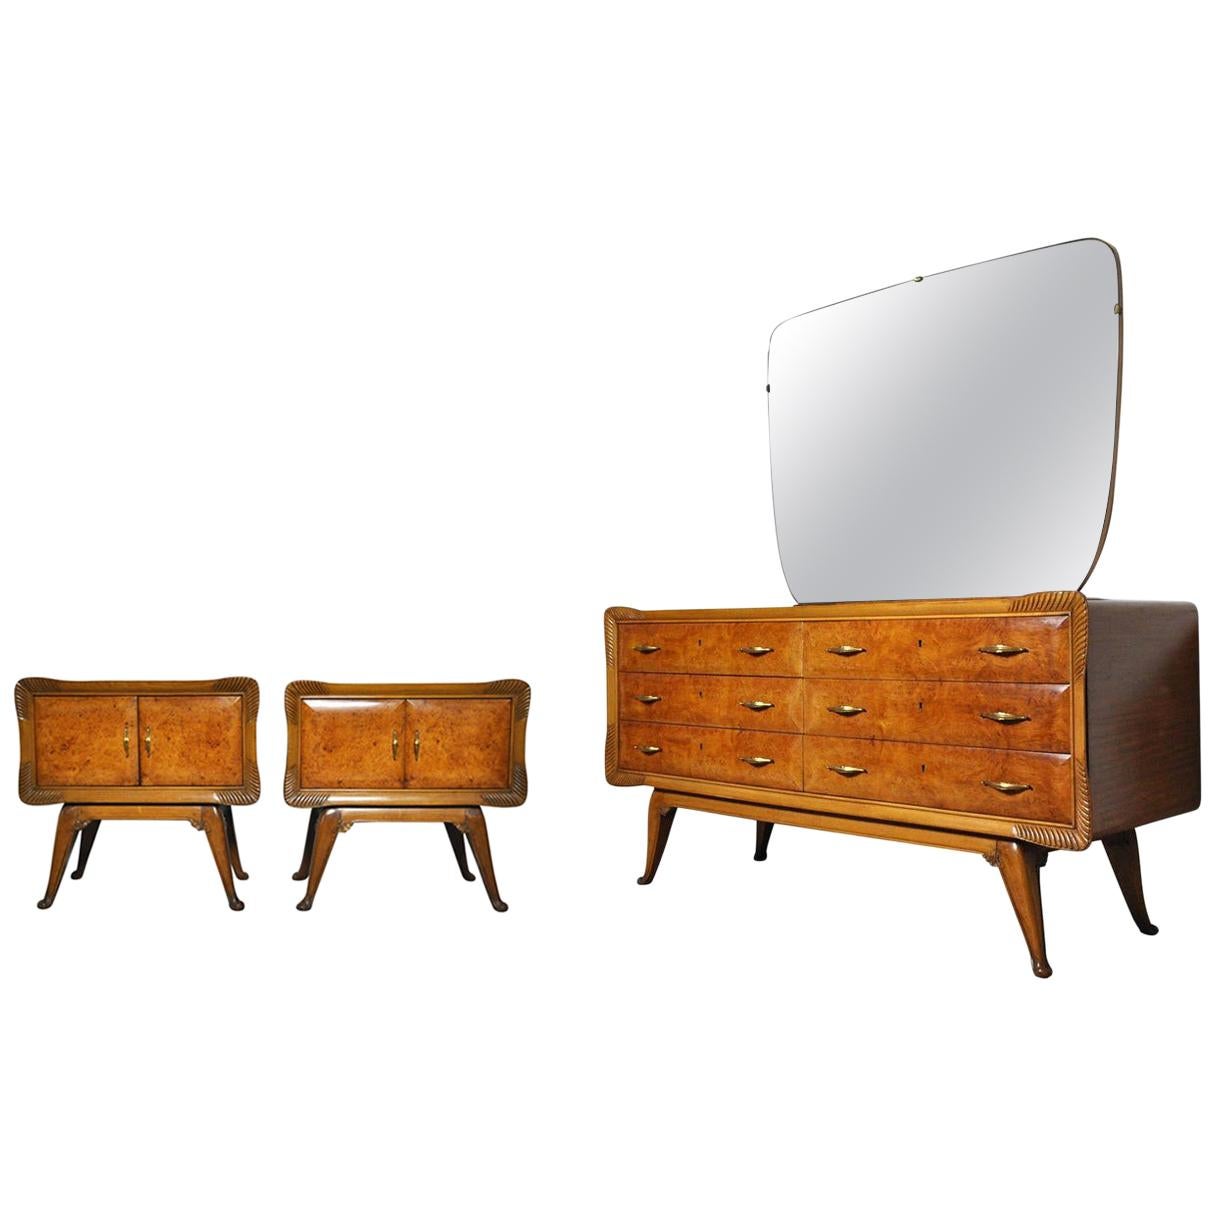 Italian Art Deco Set of Chest of Drawers and Nightstands, 1930s For Sale